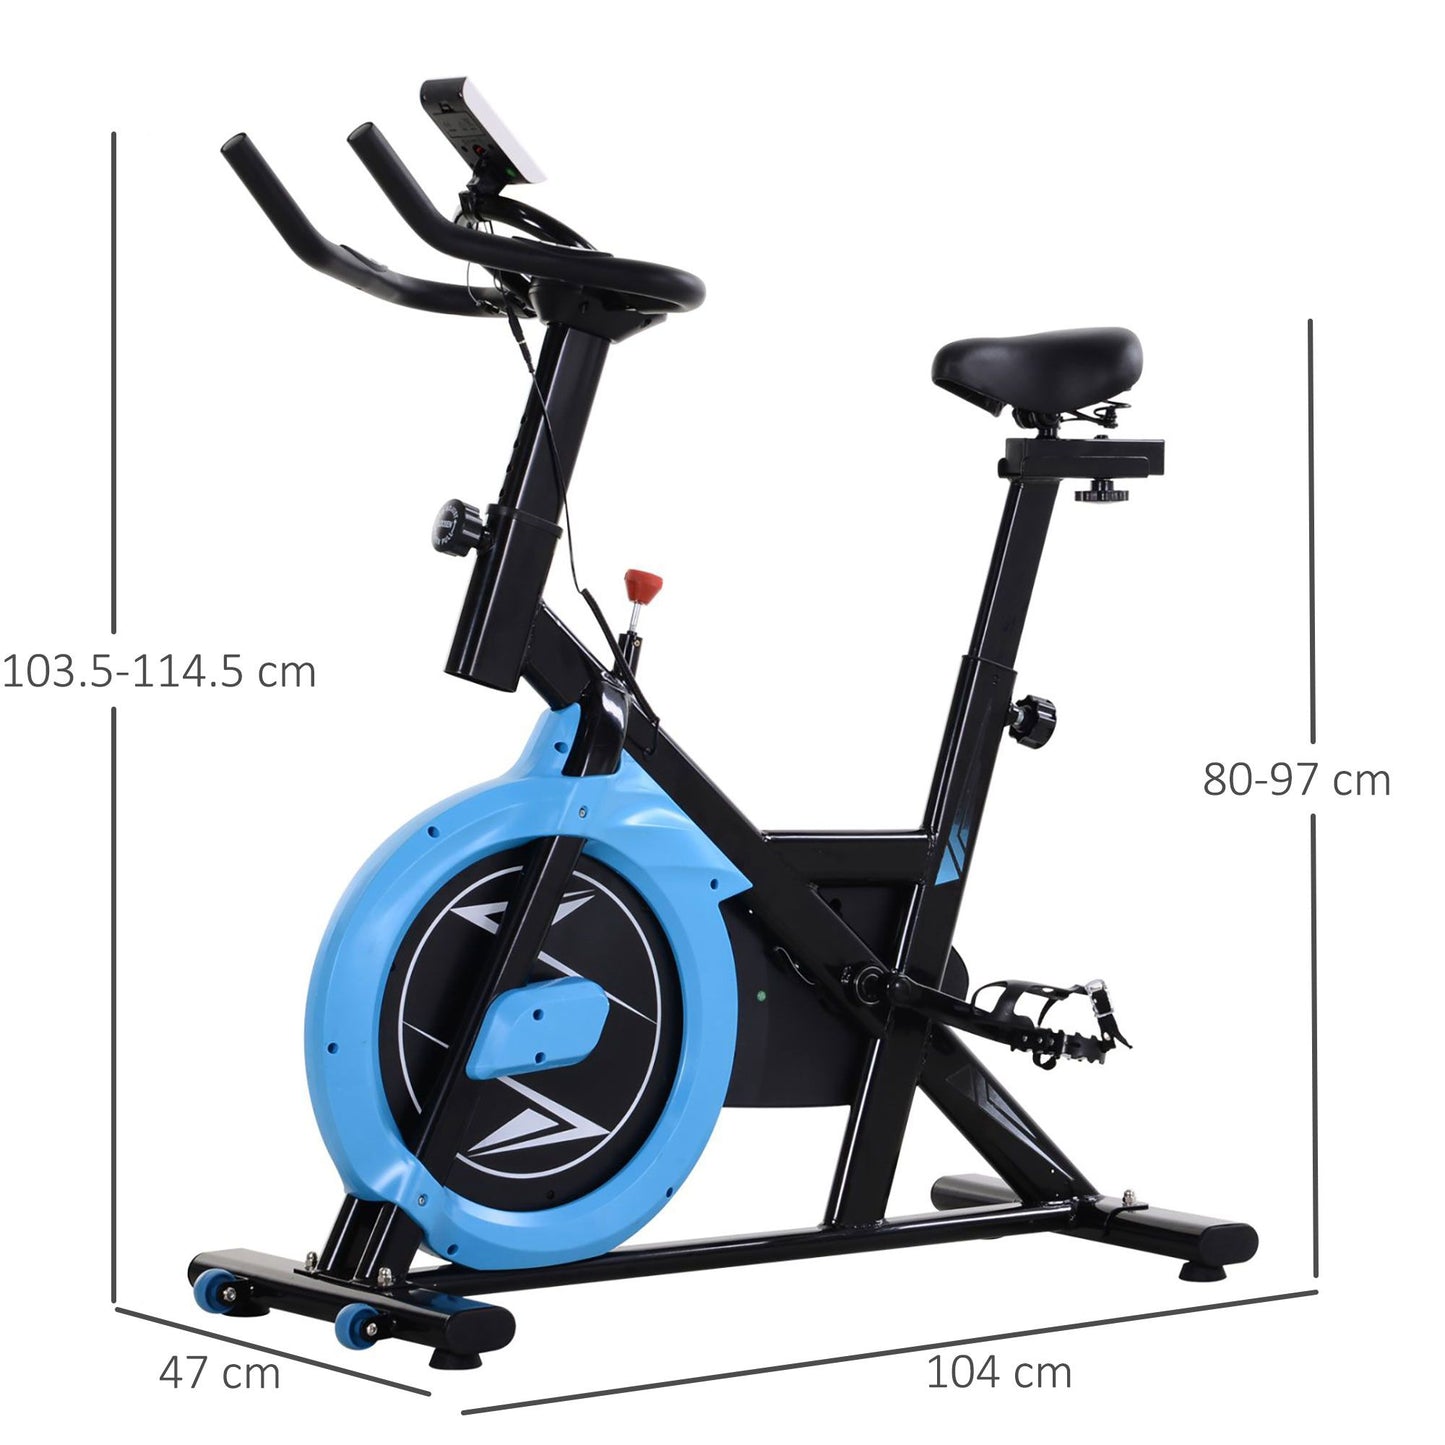 HOMCOM Upright Stationary Exercise Bike Belt Drive Home Gym Indoor Cycling with LCD Monitor